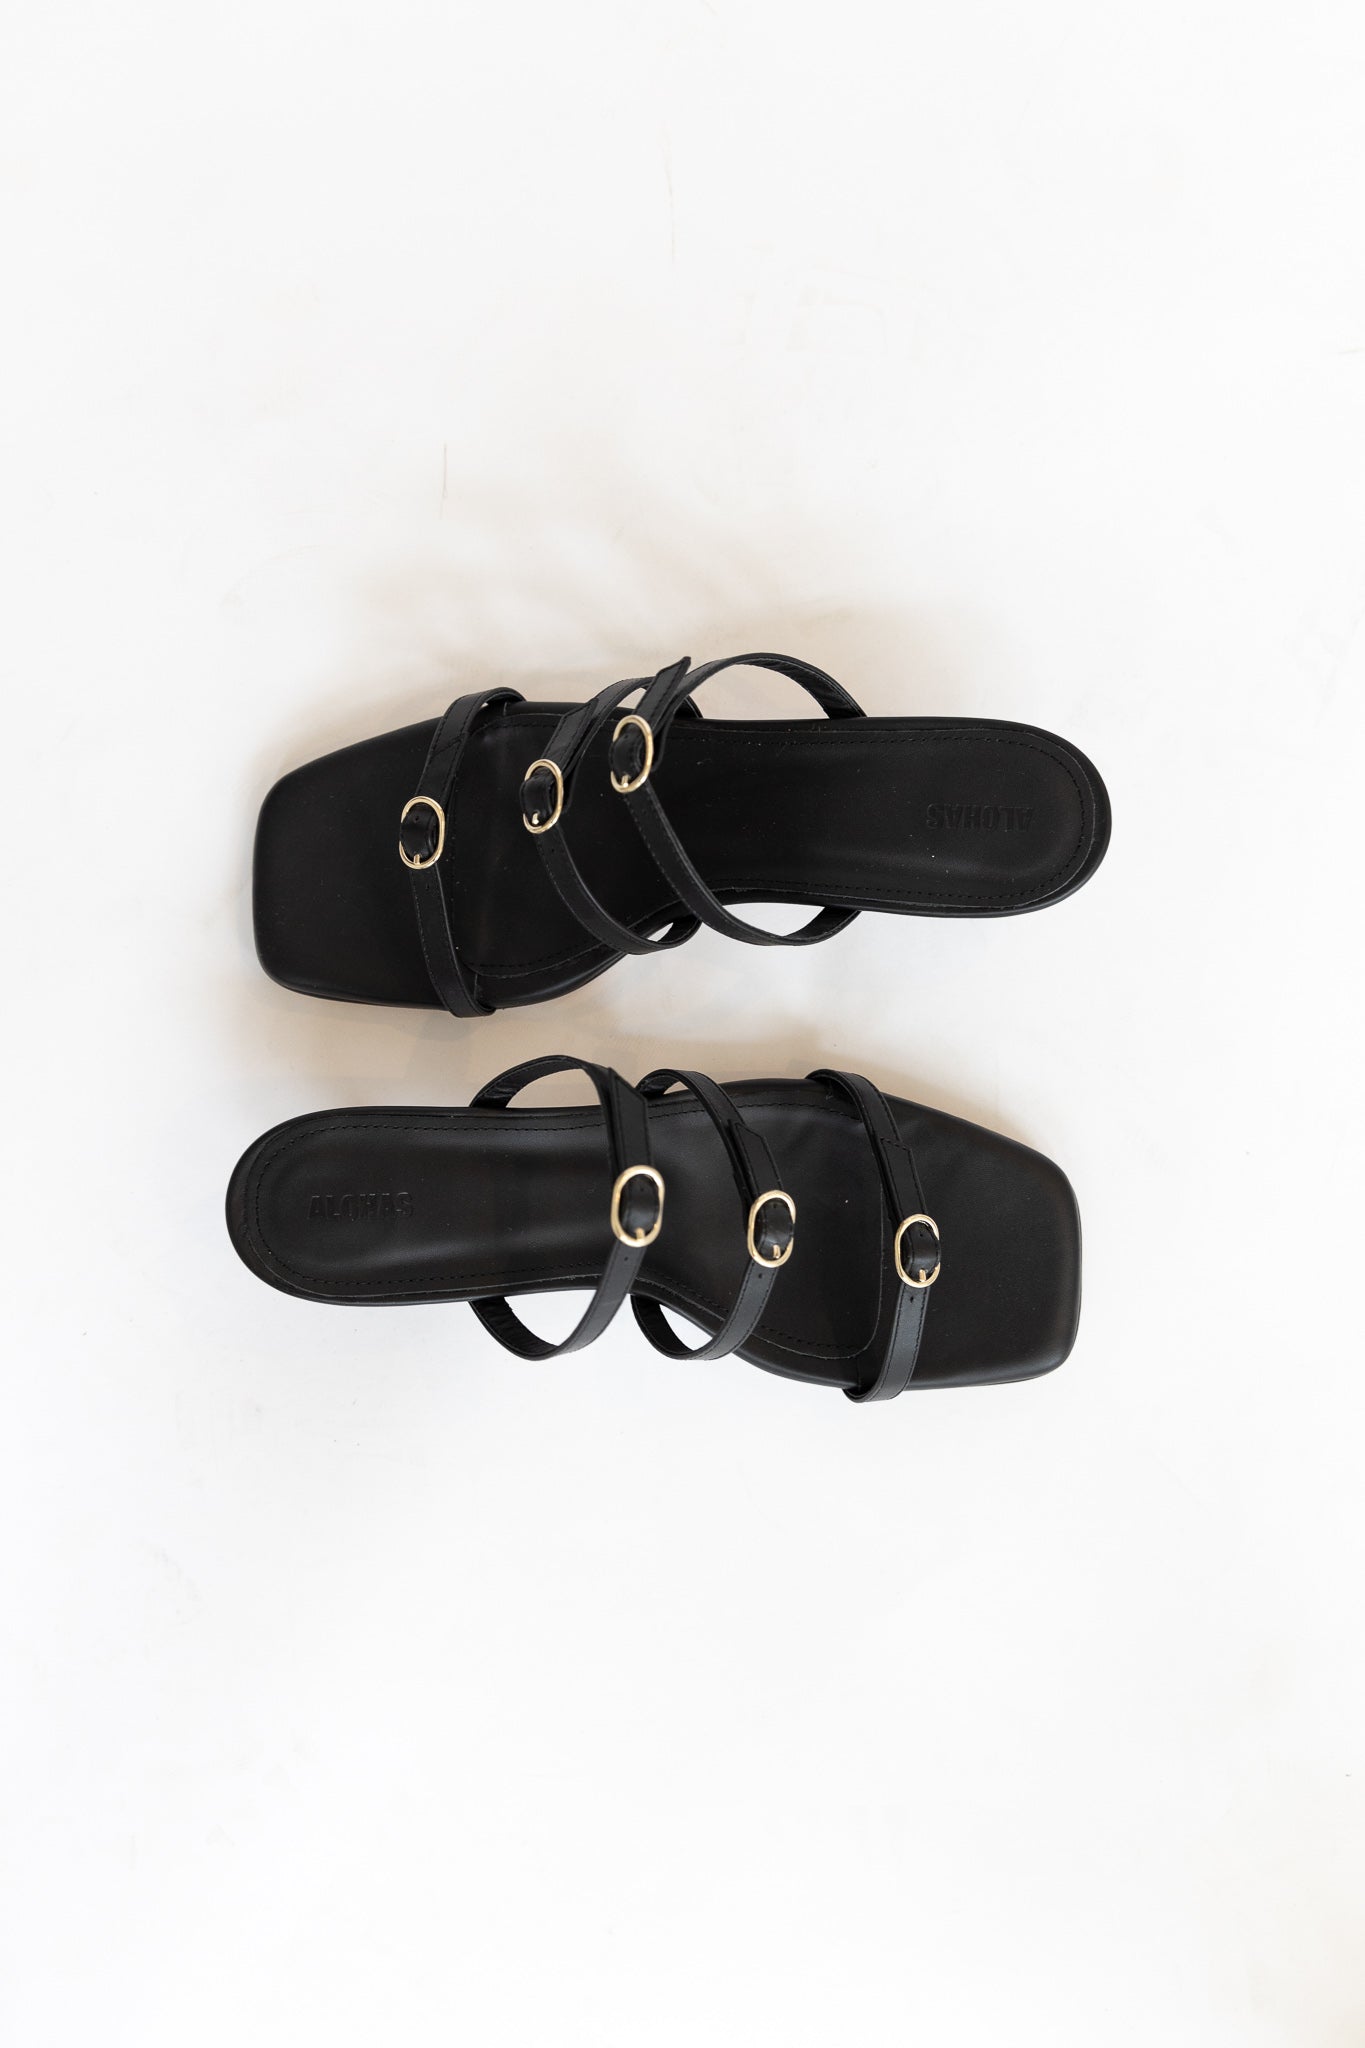 Artefact Sandals by Alohas